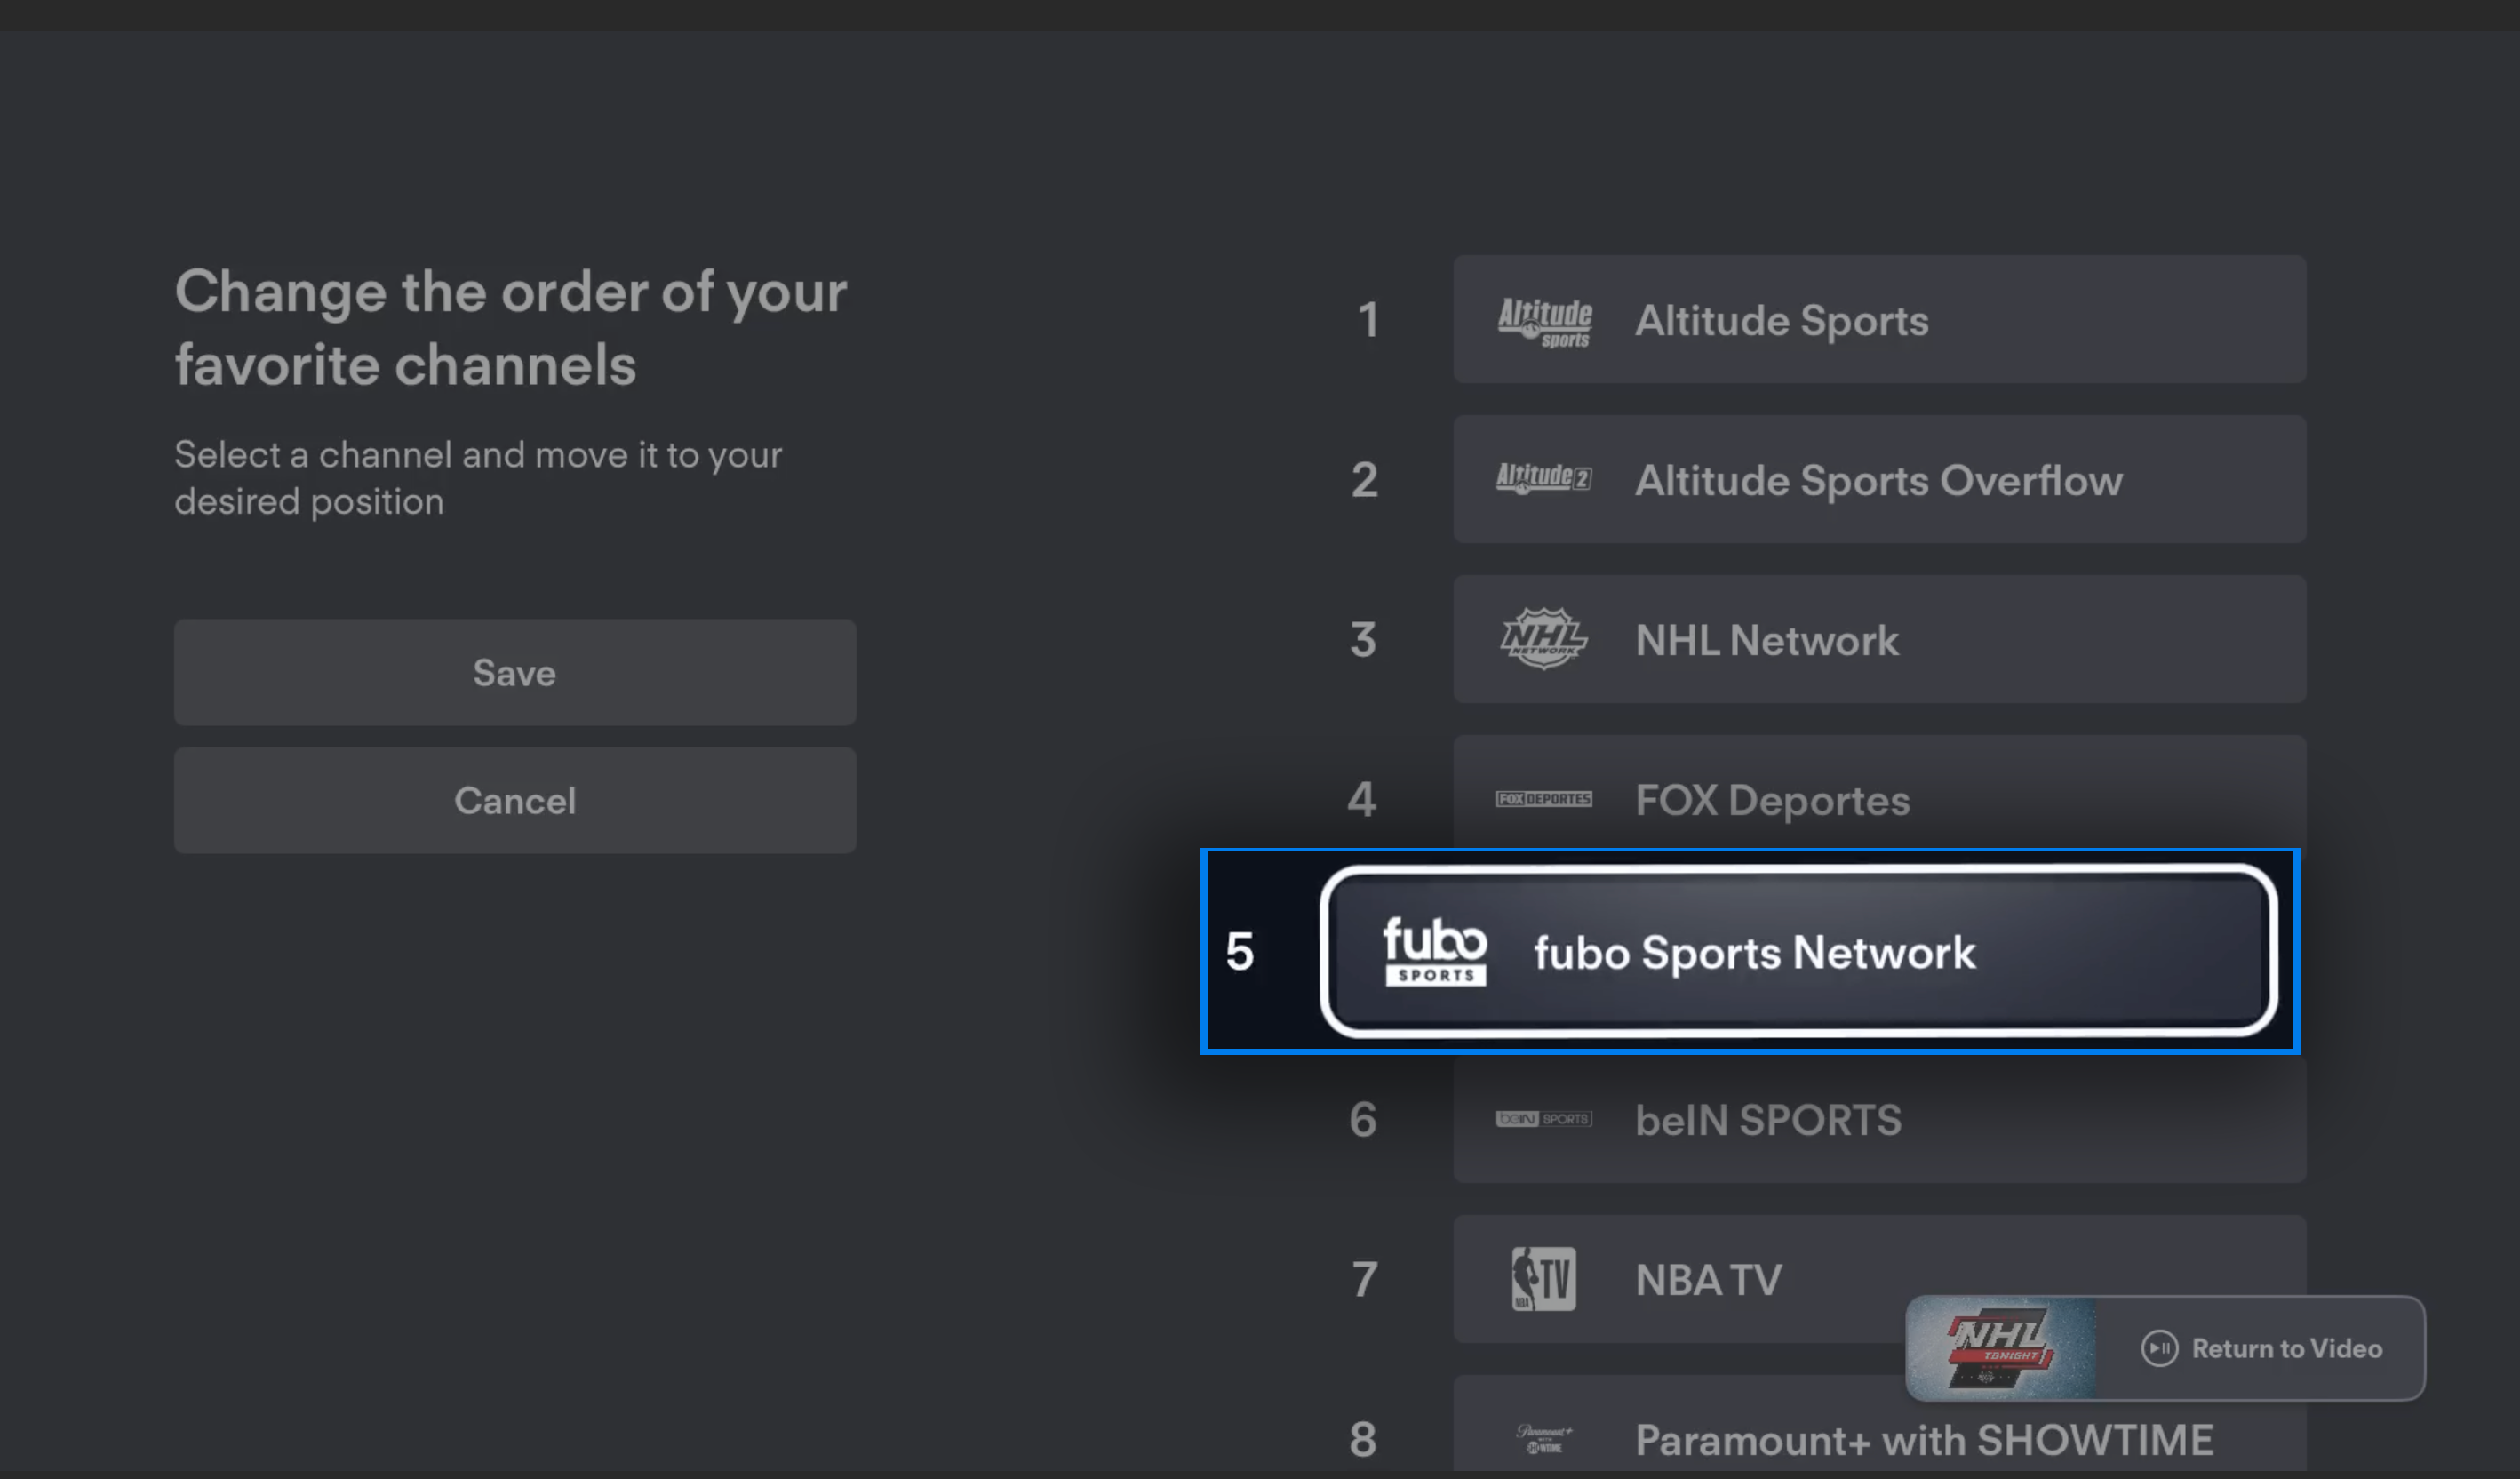 GUIDE screen of the FuboTV app on Apple TV with a relocated favorite channel; remote control overlay highlighting the MENU button, press MENU to save changes